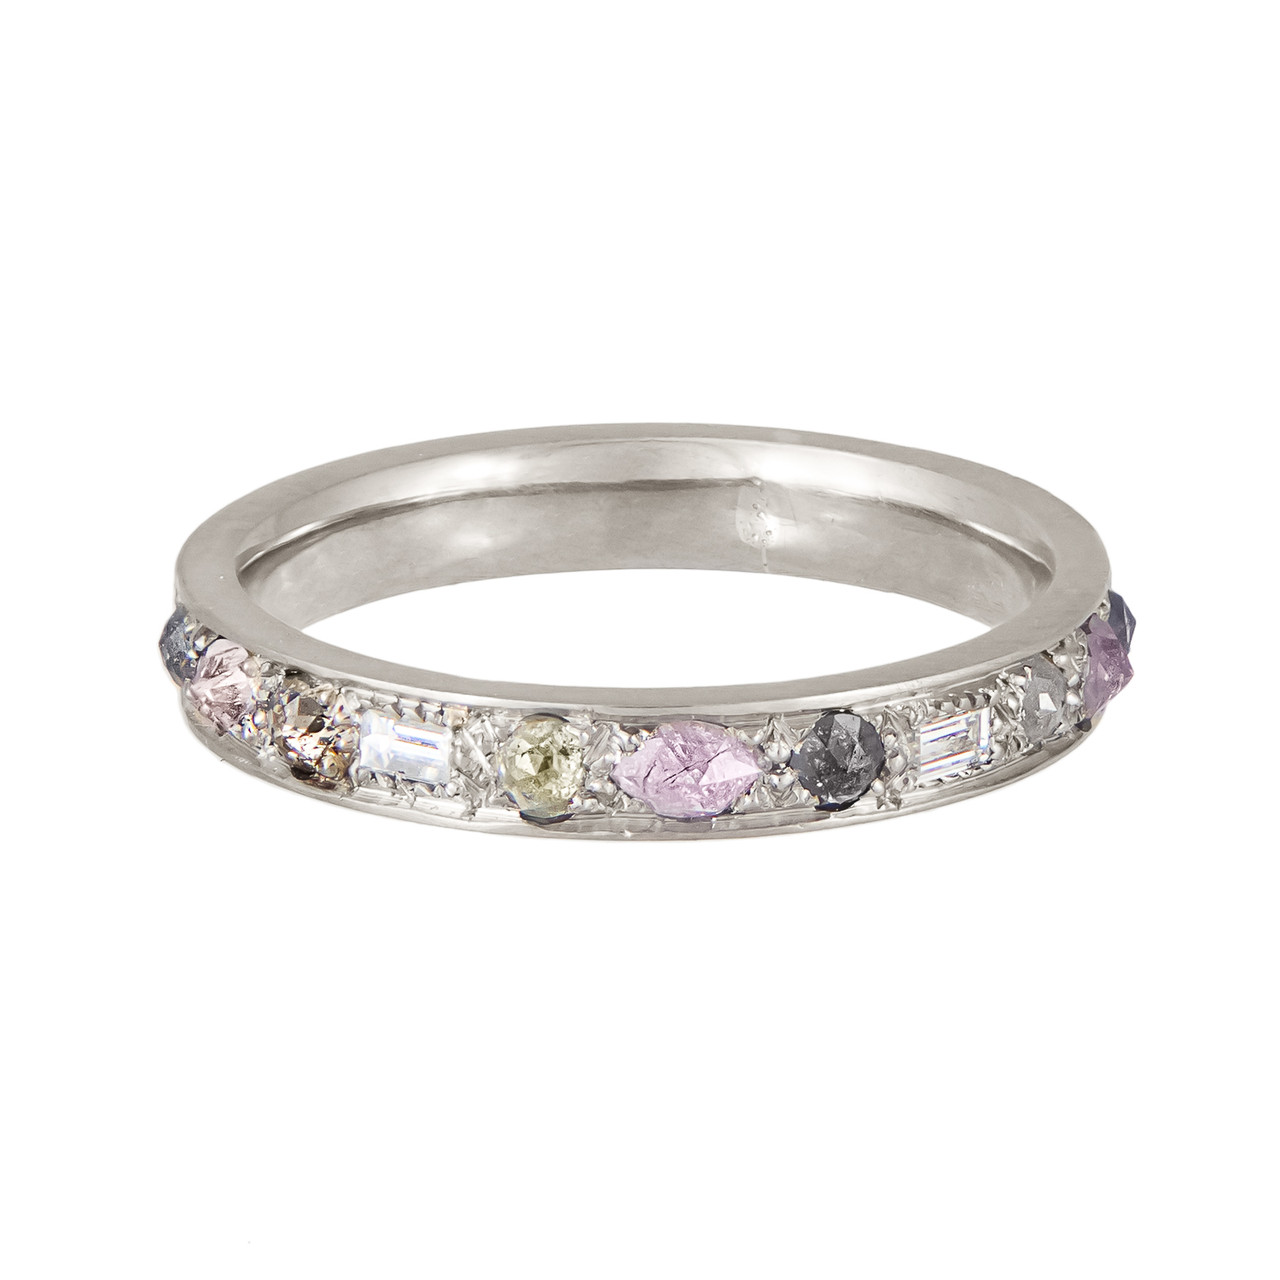 tomfoolery, 18ct White Gold Mixed Cut Puzzle Pink Diamond Eternity Ring, Muse by tomfoolery